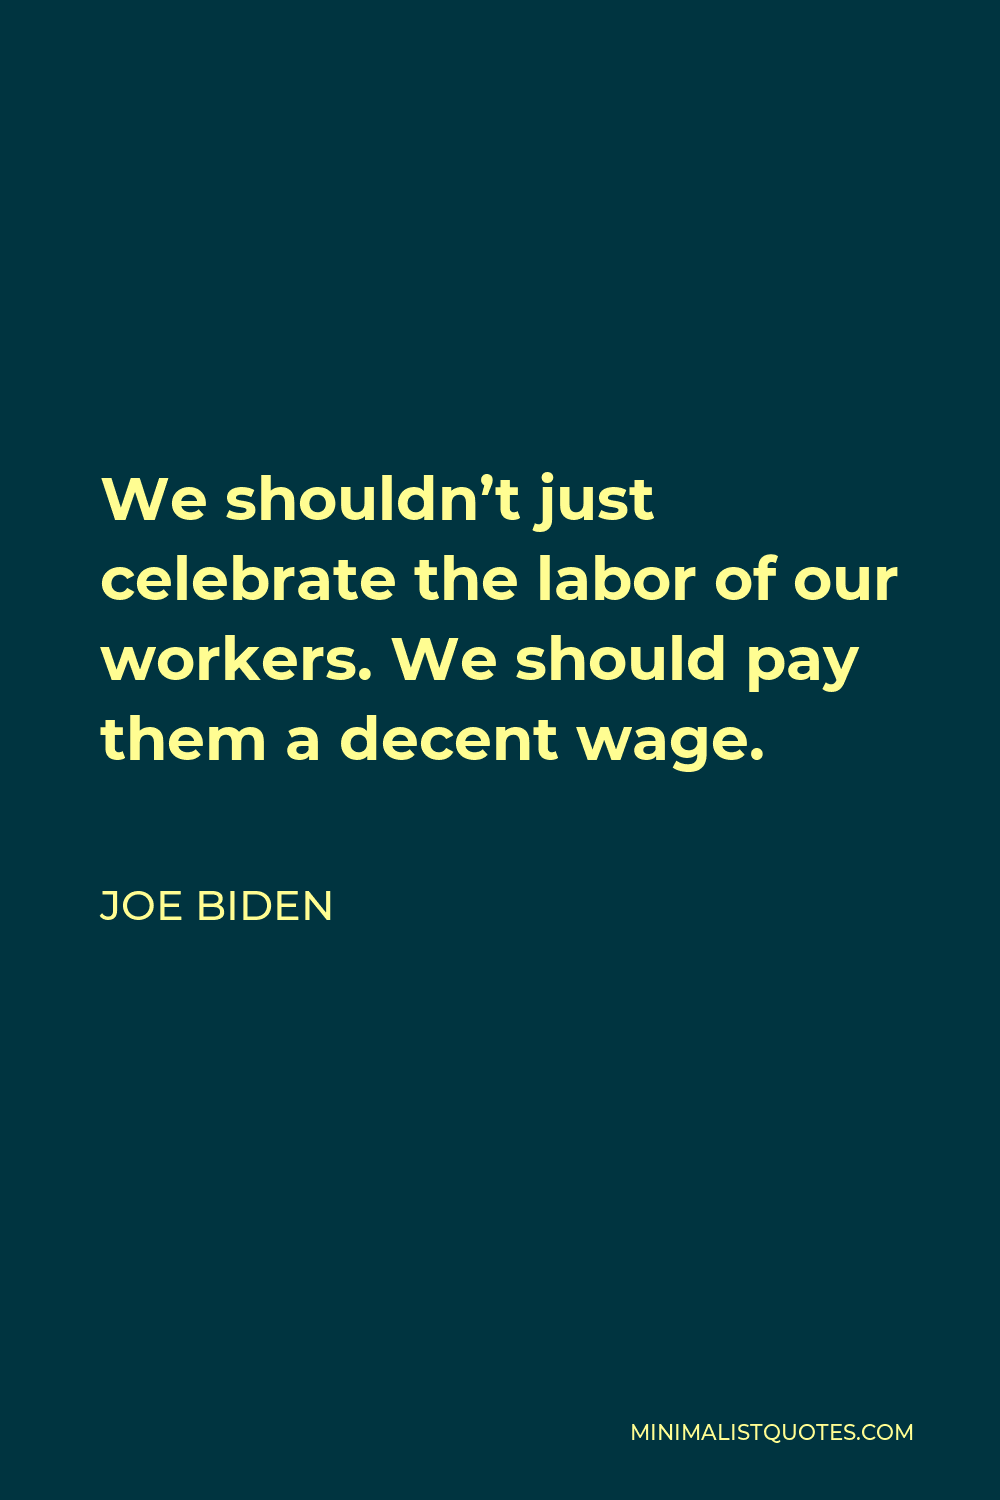 Joe Biden Quote - We shouldn’t just celebrate the labor of our workers. We should pay them a decent wage.